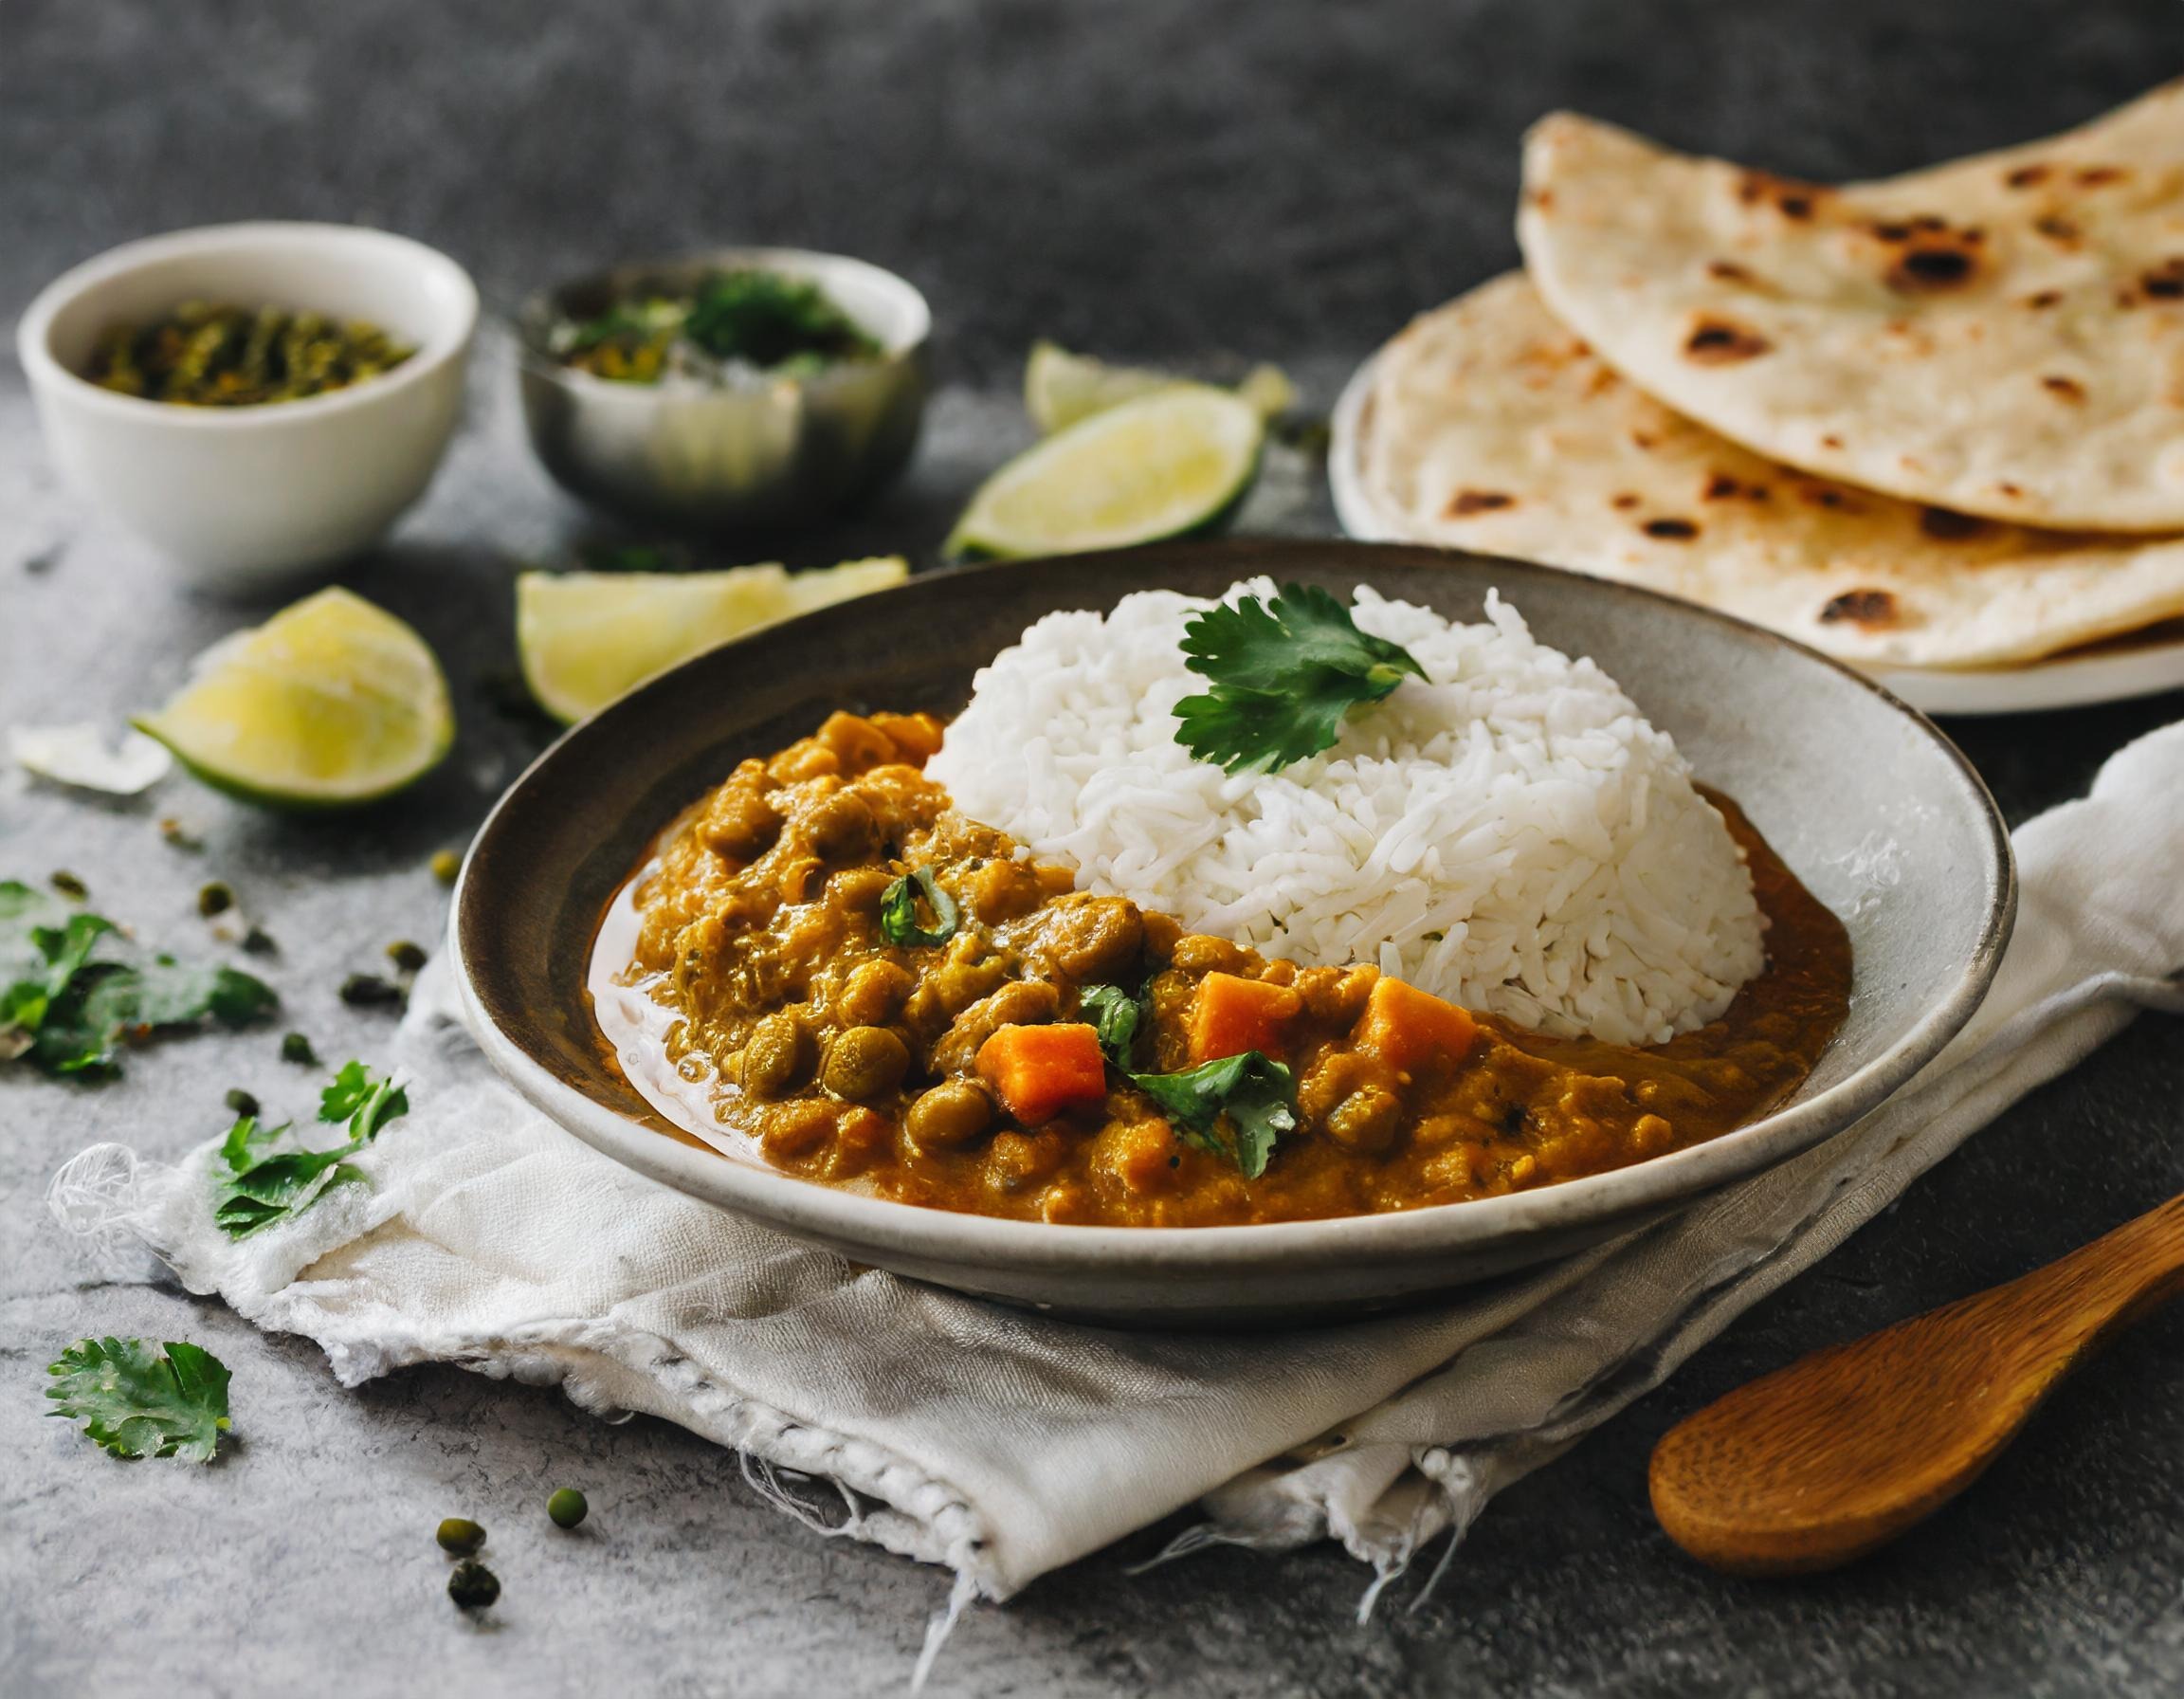 A Lentil Vegetable Curry Recipe to Ignite Your Taste Buds